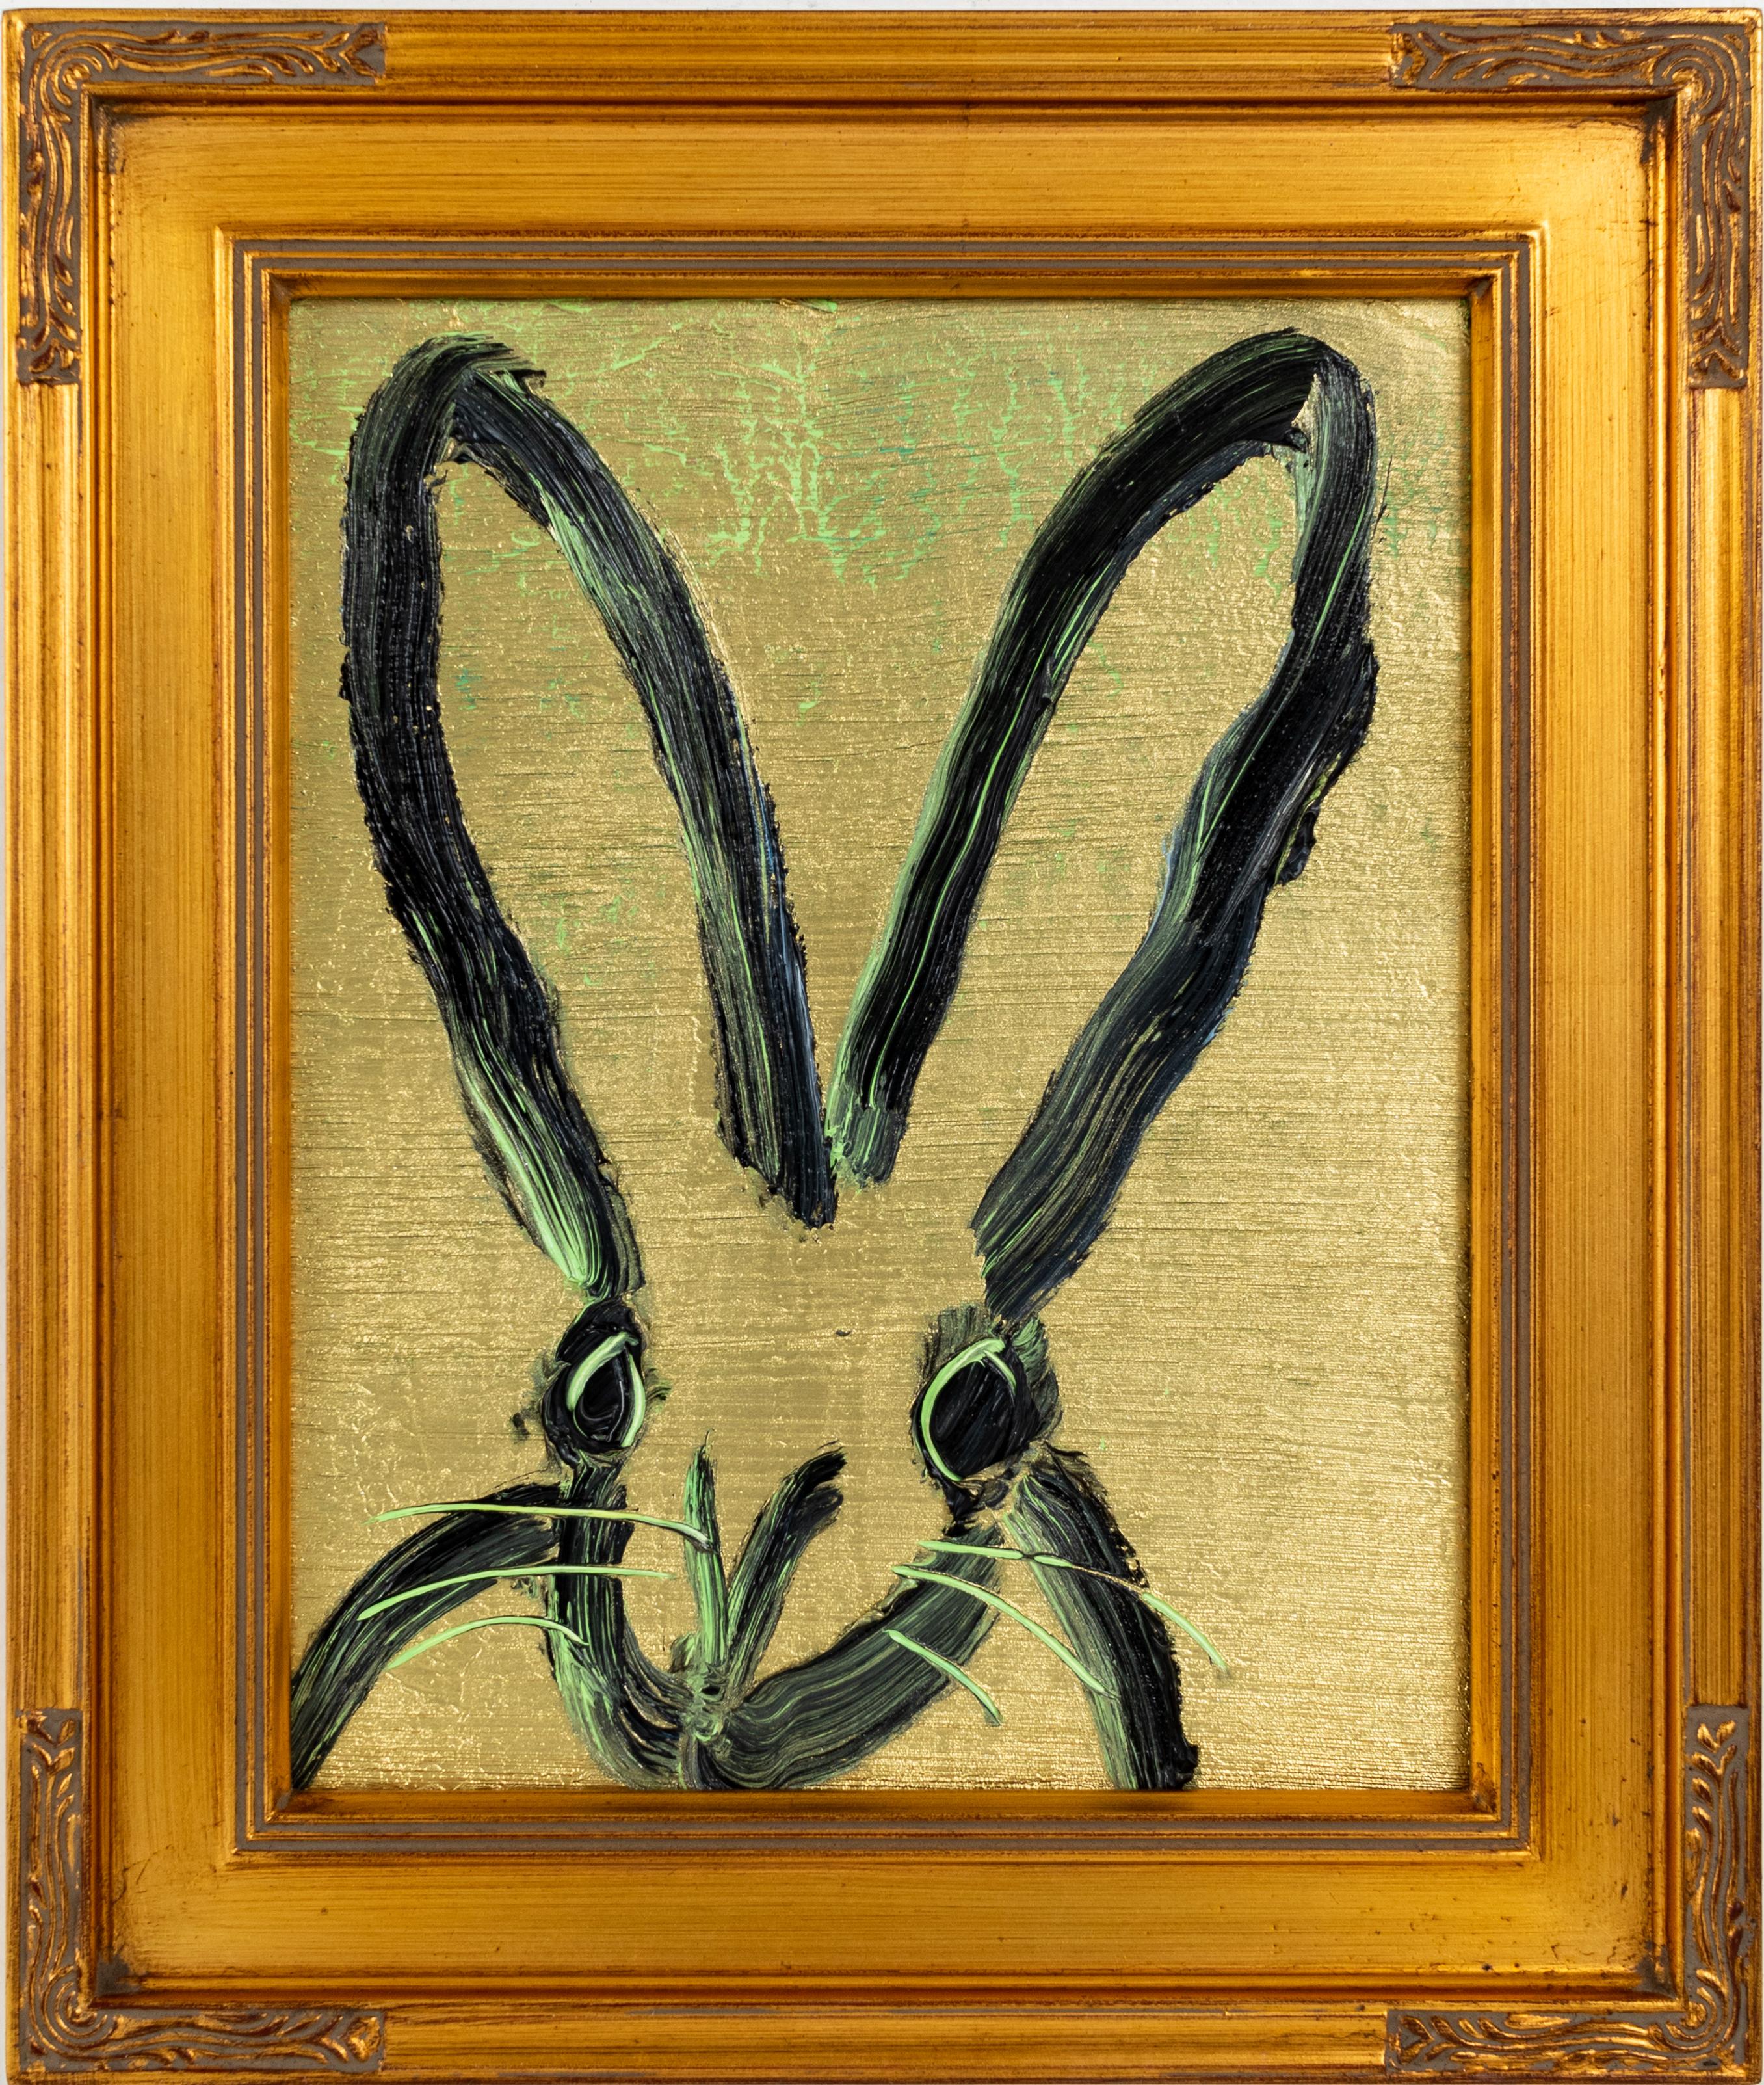 Hunt Slonem "Gold" Metallic Bunny
Black gestured bunny on a gold metallic background in an antique frame

Unframed: 10 x 8 inches  
Framed: 13.5 x 11.5 inches
*Painting is framed - Please note that not all Hunt Slonem frames are not in mint